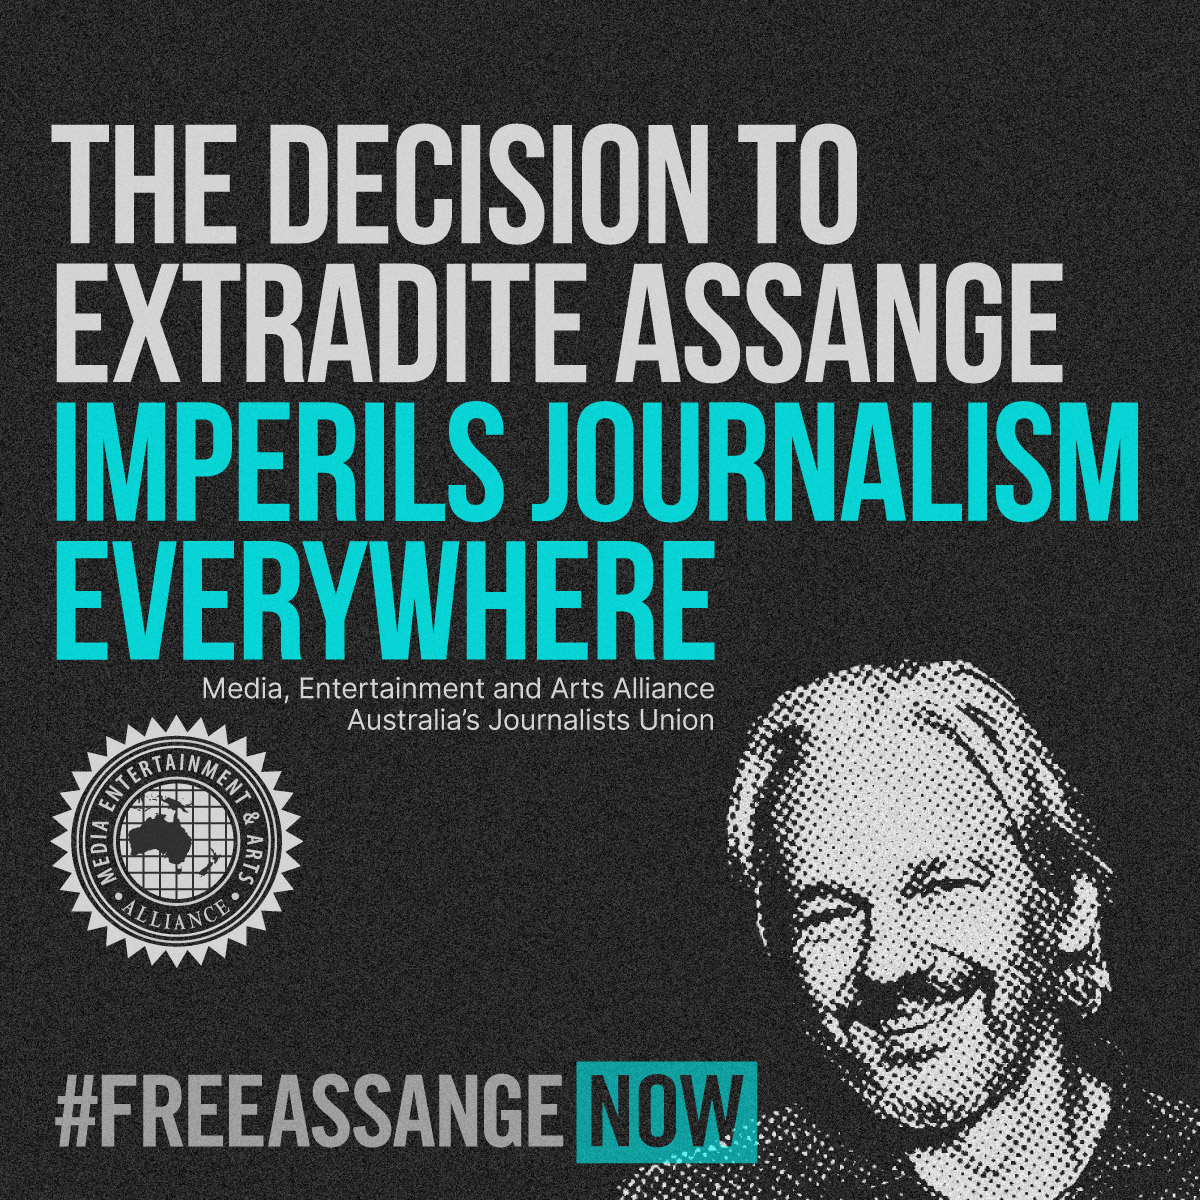 'The decision to extradite Assange imperils journalism everywhere.'—Australia's journalists union @withMEAA #FreeAssangeNOW #DropTheCharges